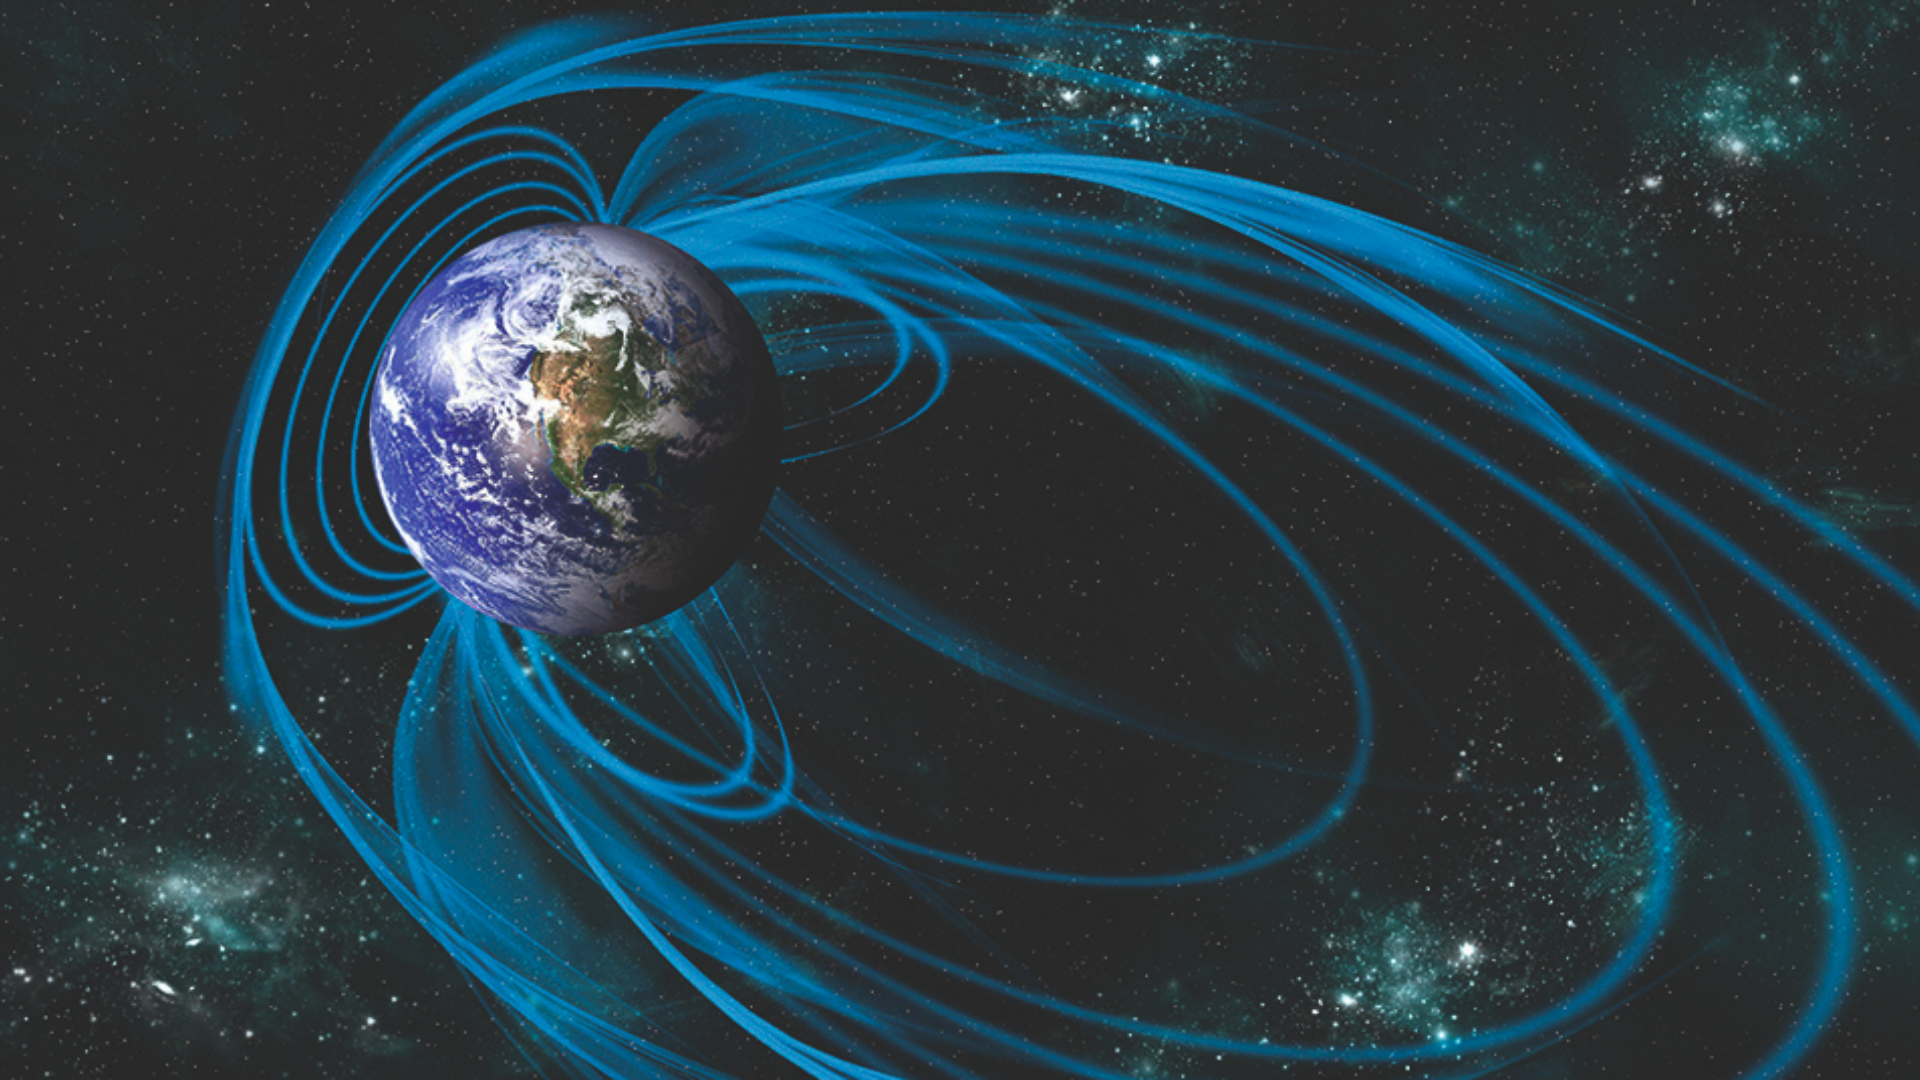 Why The Shifting And Flipping Of Earth’s Poles Raises Concerns?